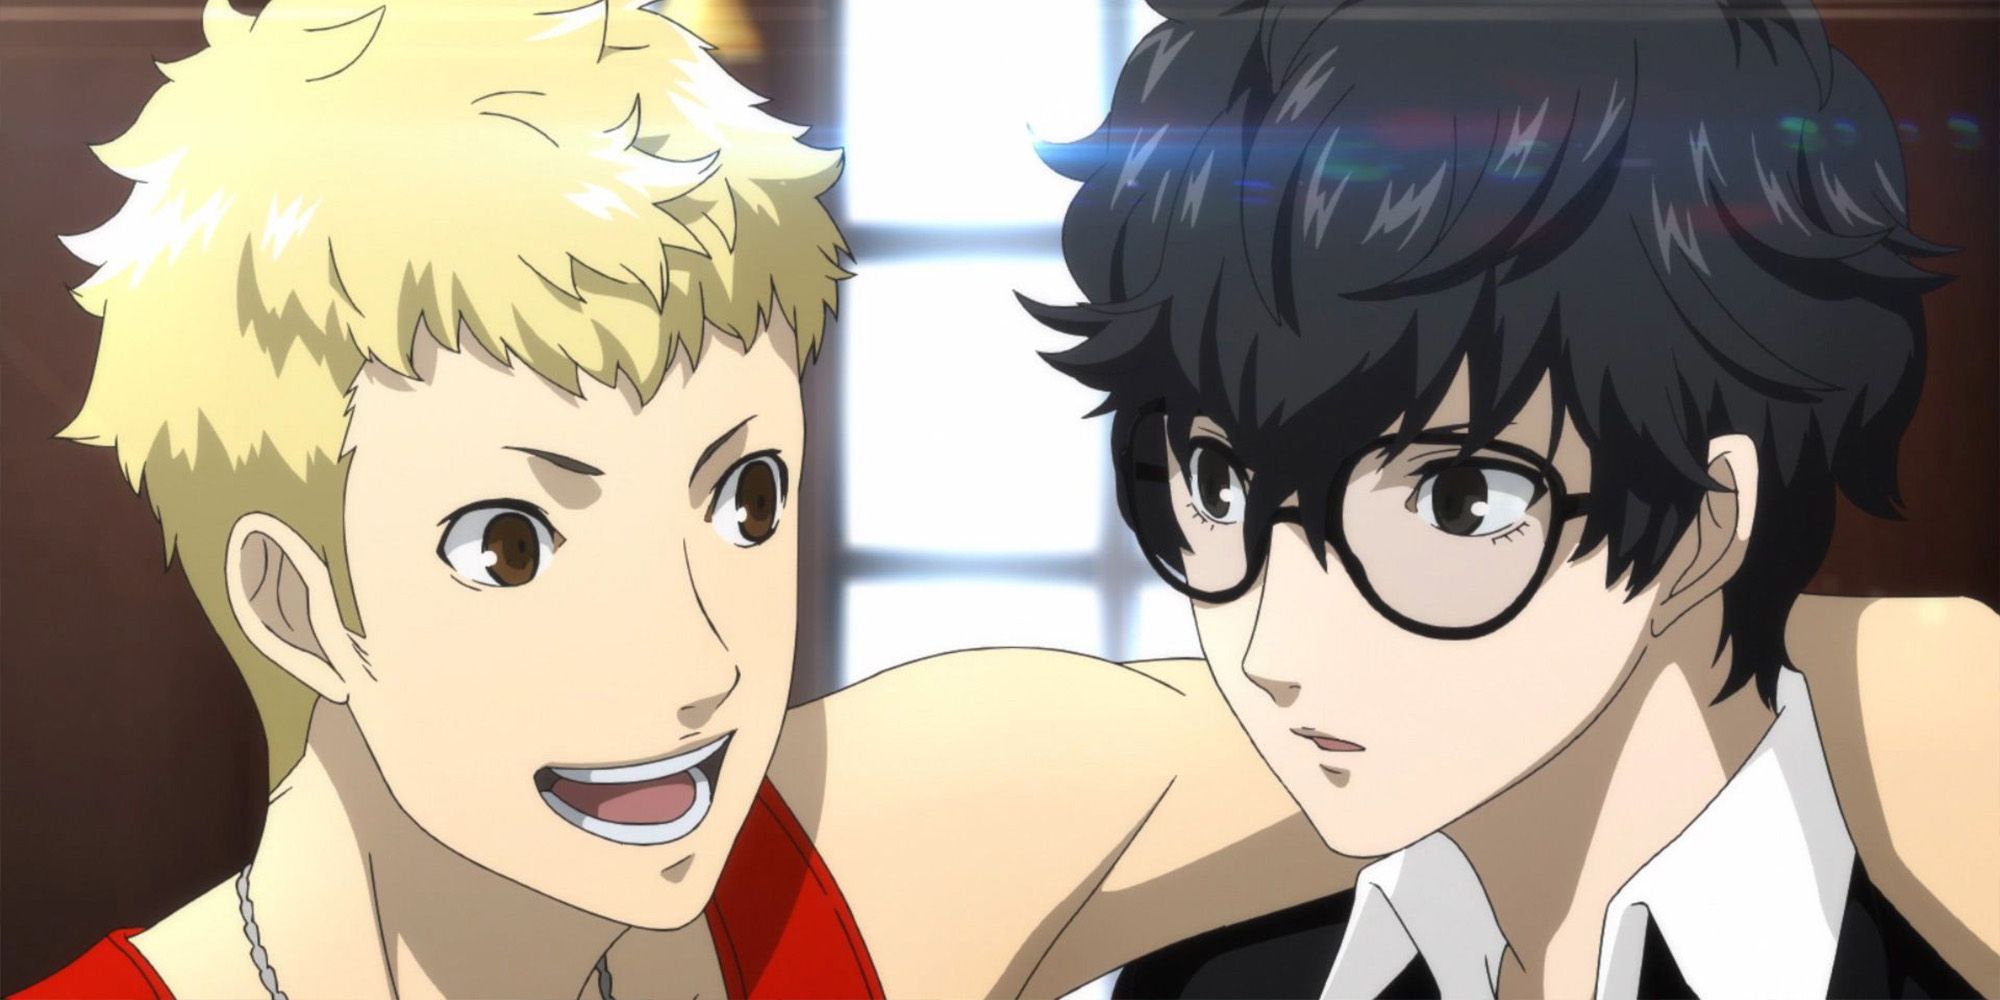 9 Changes And Fixes To Make Persona 5 Royal Even Better